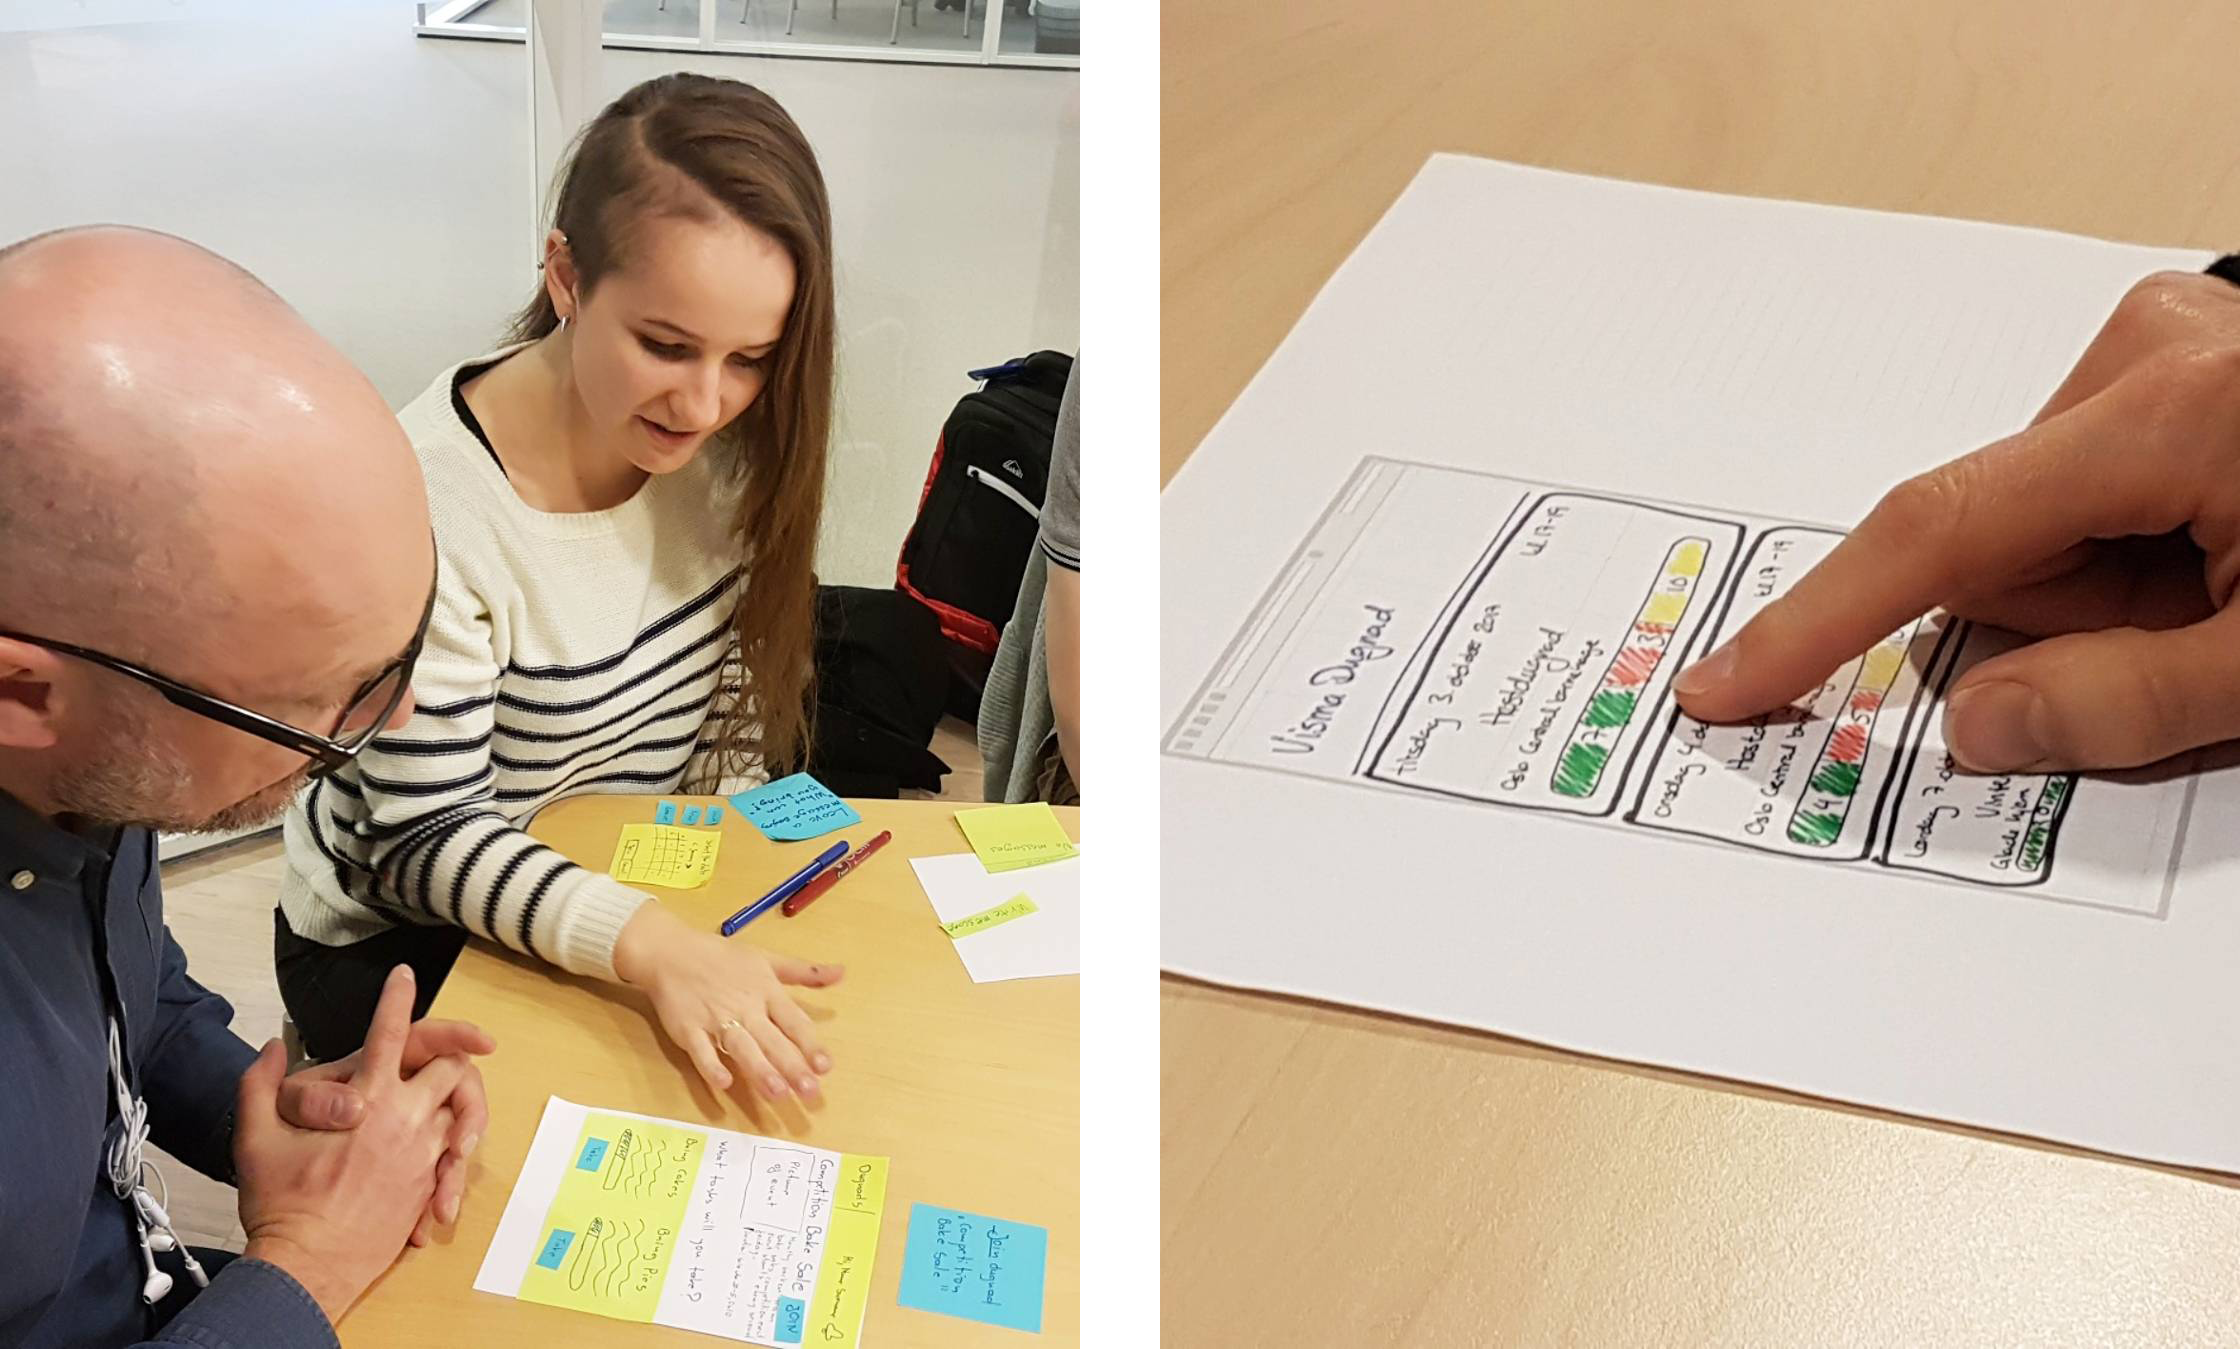 One of the participants, Vaida, testing out a paper prototype on a mentor before testing with users.